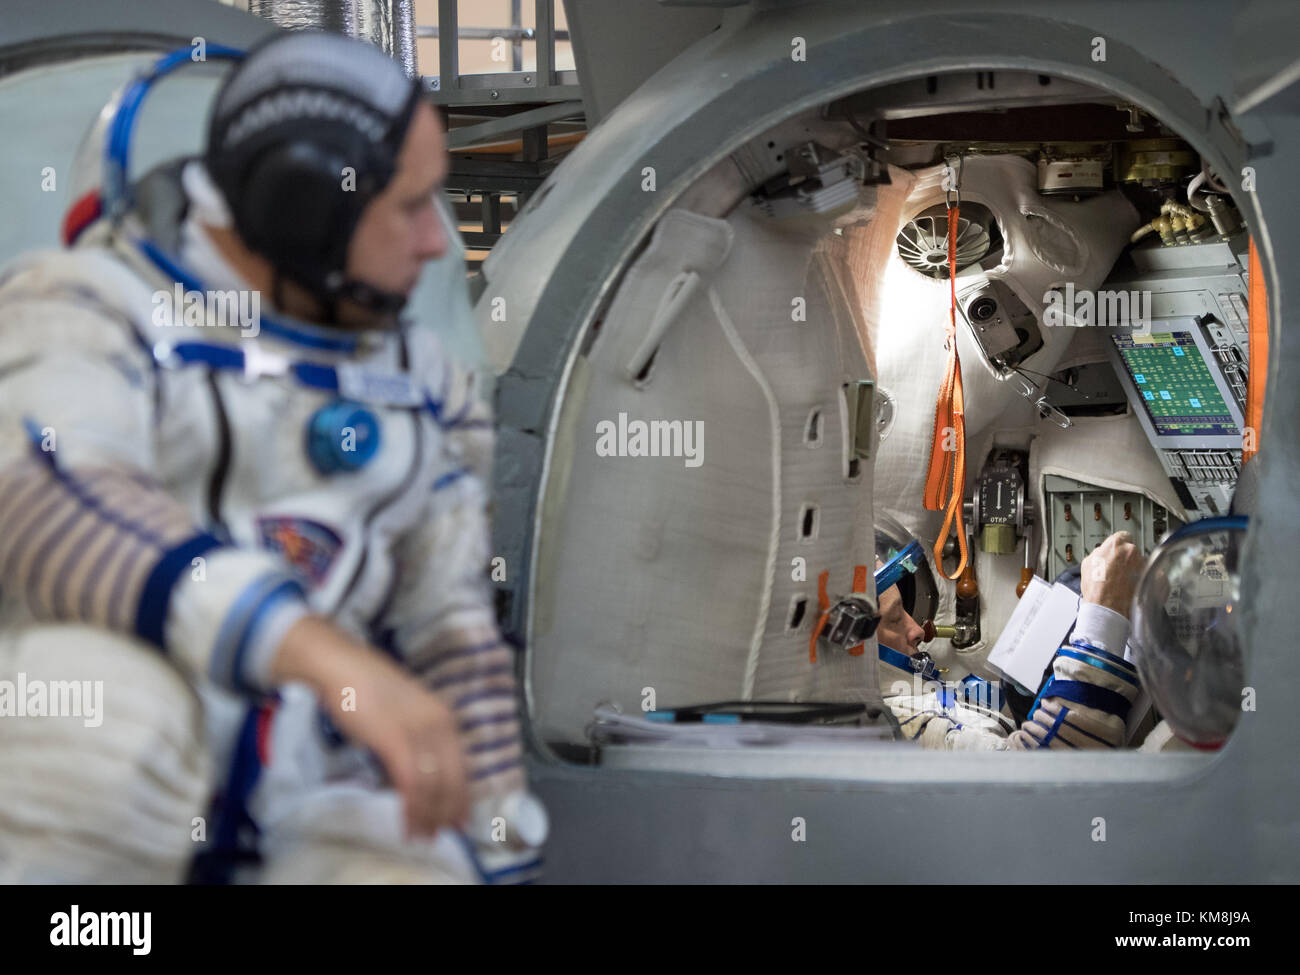 NASA International Space Station Expedition 53 backup crew member Russian cosmonaut Anton Shkaplerov of Roscosmos waits to enter the Soyuz MS-06 spacecraft simulator during during his Soyuz qualification exams at the Gagarin Cosmonaut Training Center August 30, 2017 in Star City, Russia.  (photo by Bill Ingalls  via Planetpix) Stock Photo